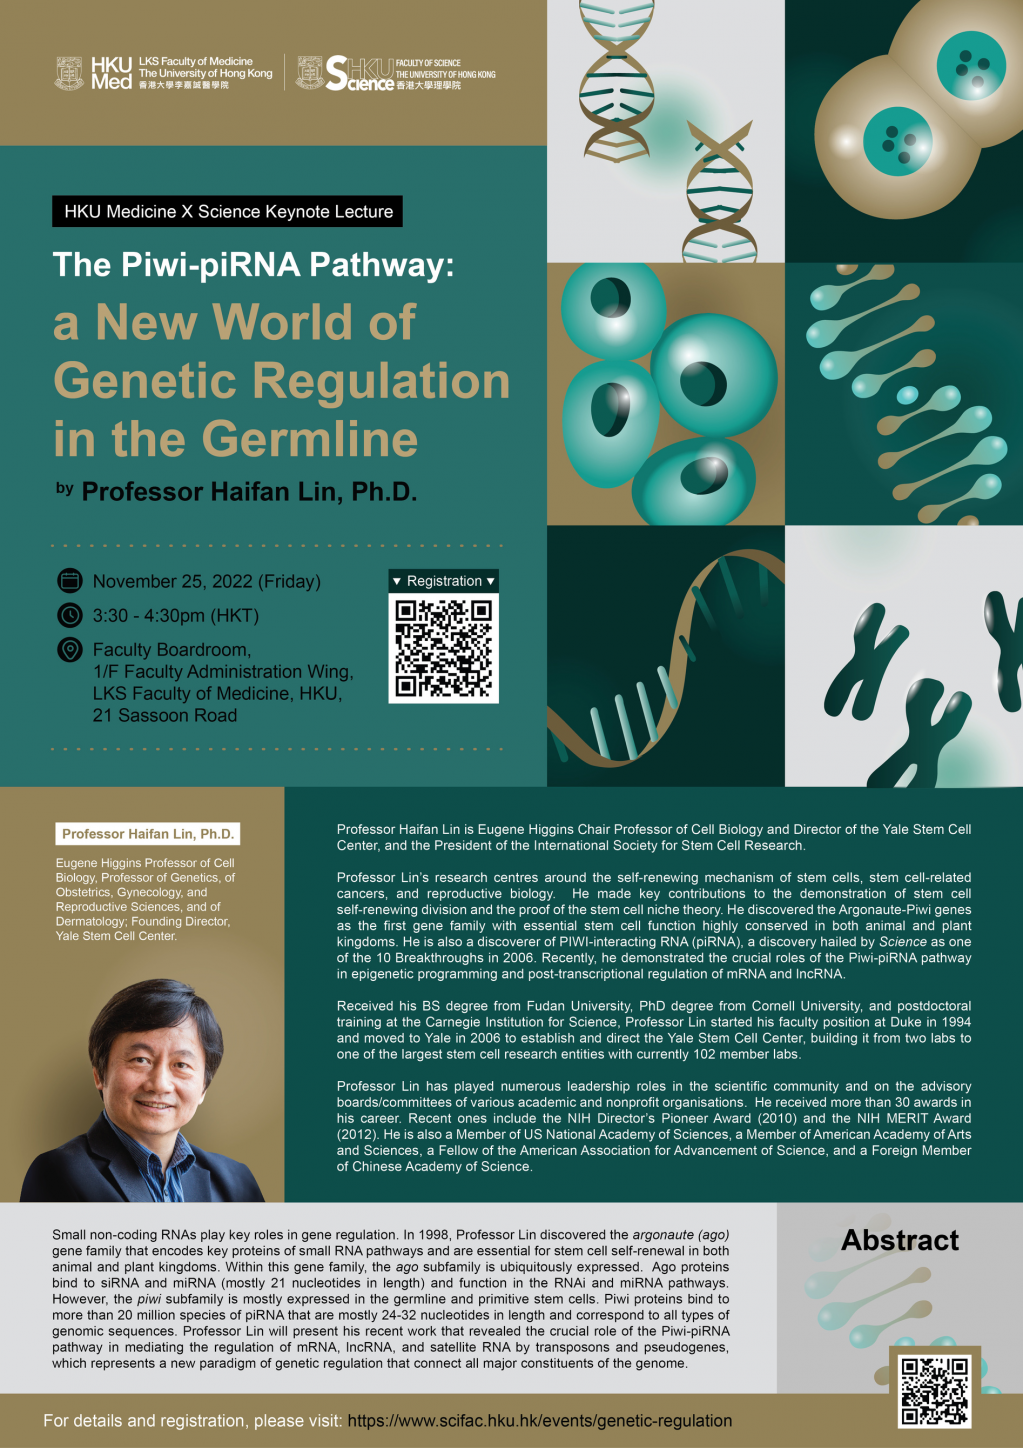 HKU Medicine x Science Keynote Lecture: The Piwi-piRNA Pathway: a New World of Genetic Regulation in the Germline